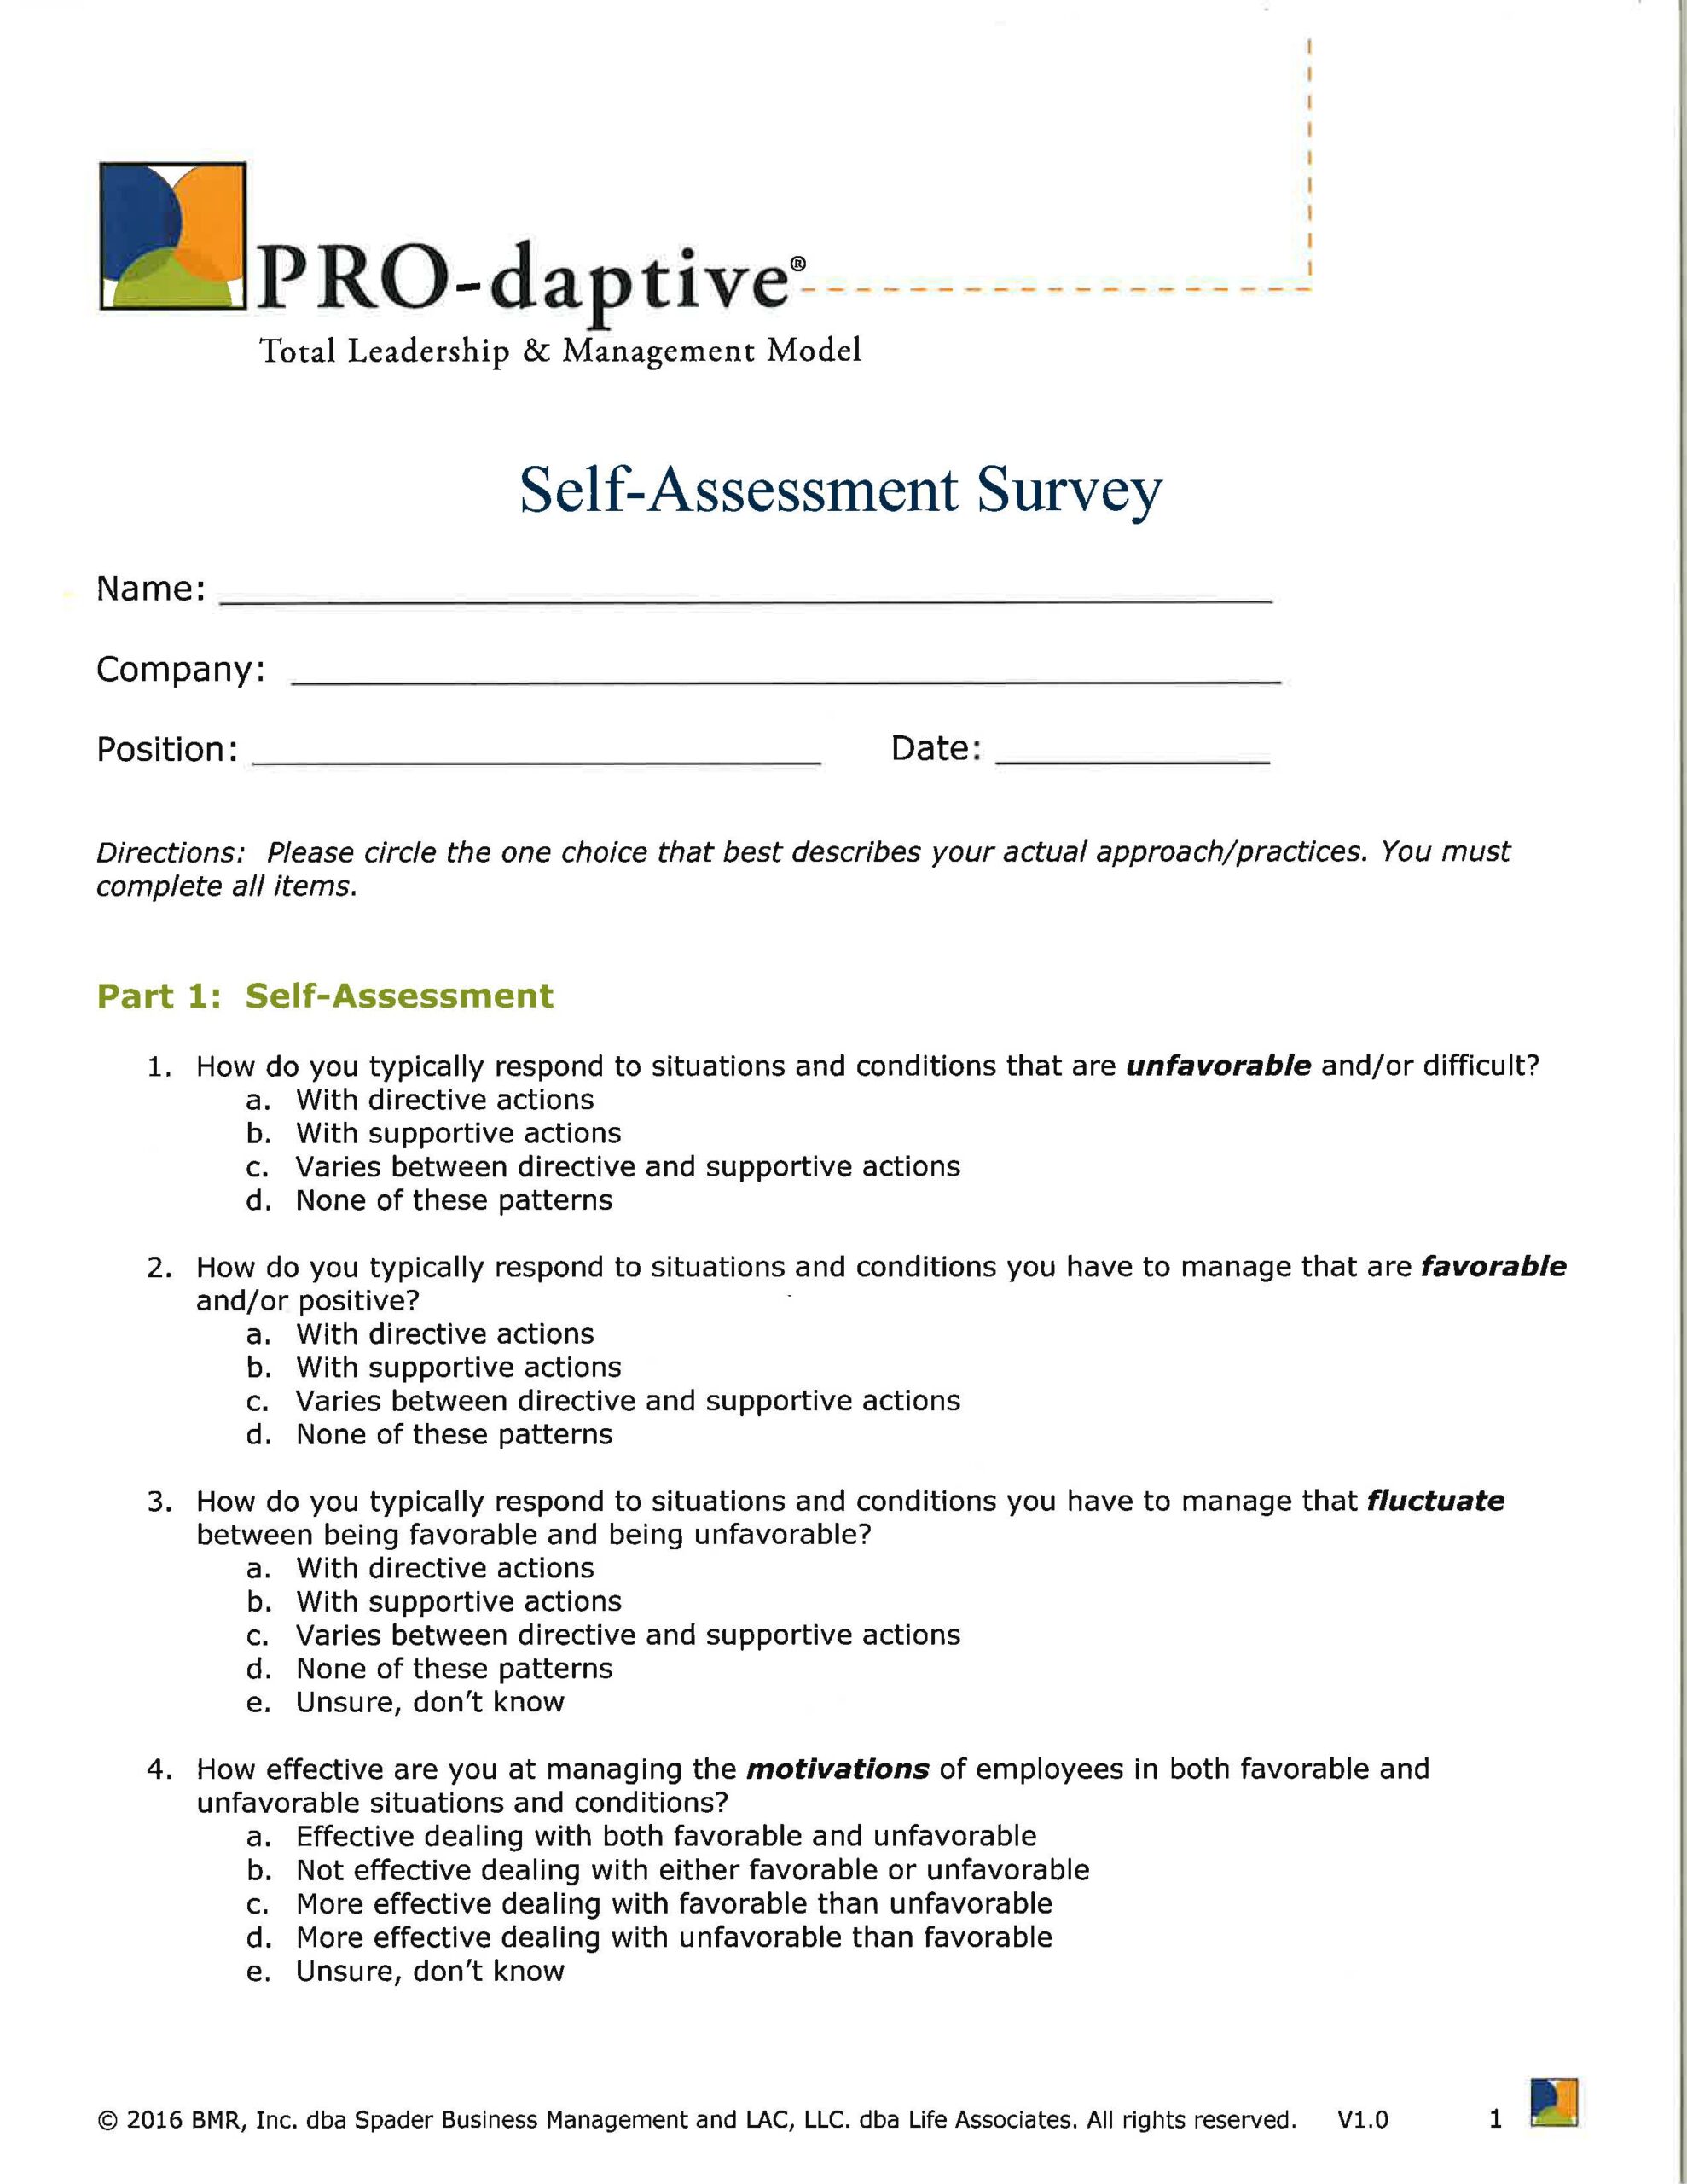 image of first page of PRO-daptive self-assessment